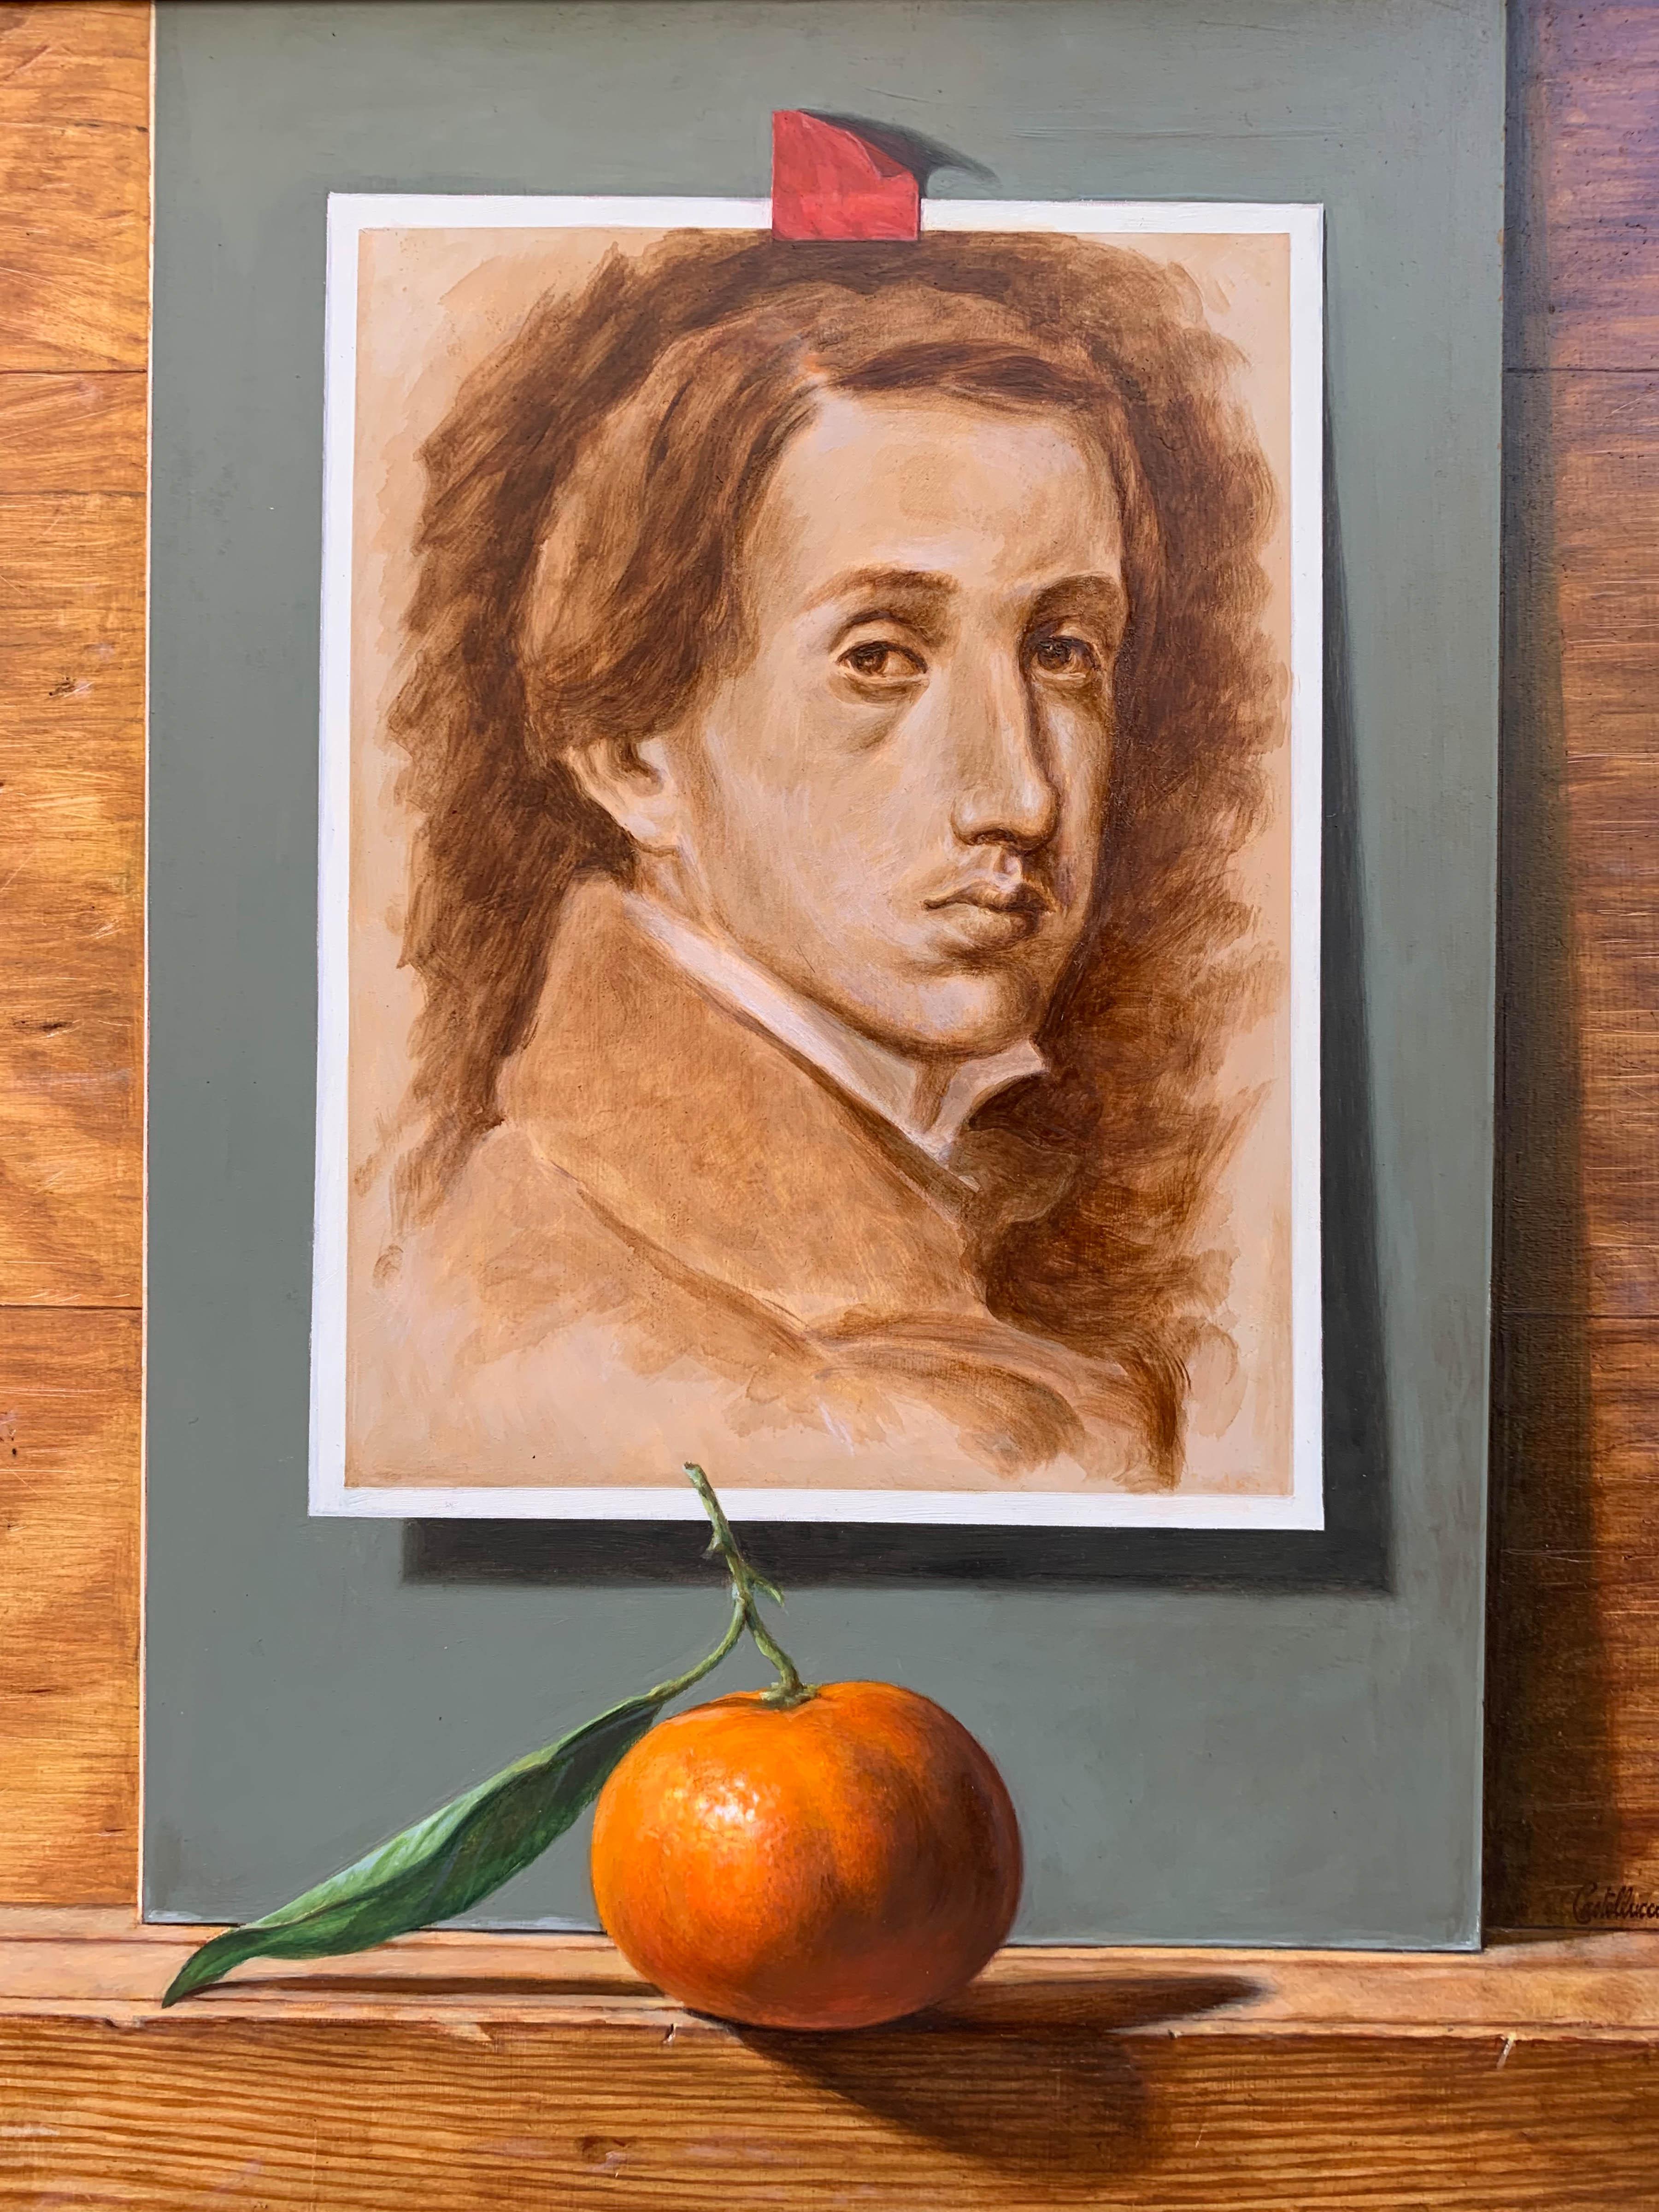 Self Portrait of Degas with Tangerine and Fine Wine - Painting by Federico Castelluccio